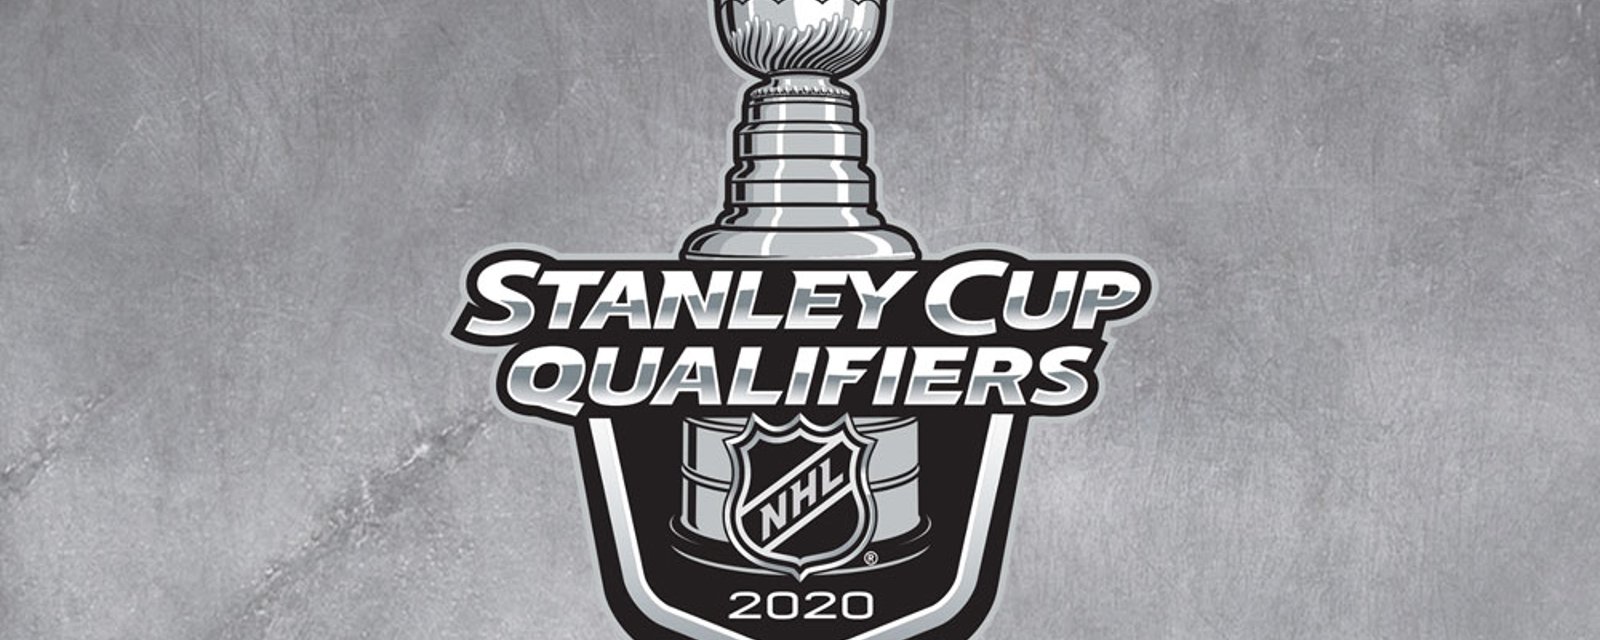 Here’s your official schedule of the Stanley Cup playoff qualifiers! 